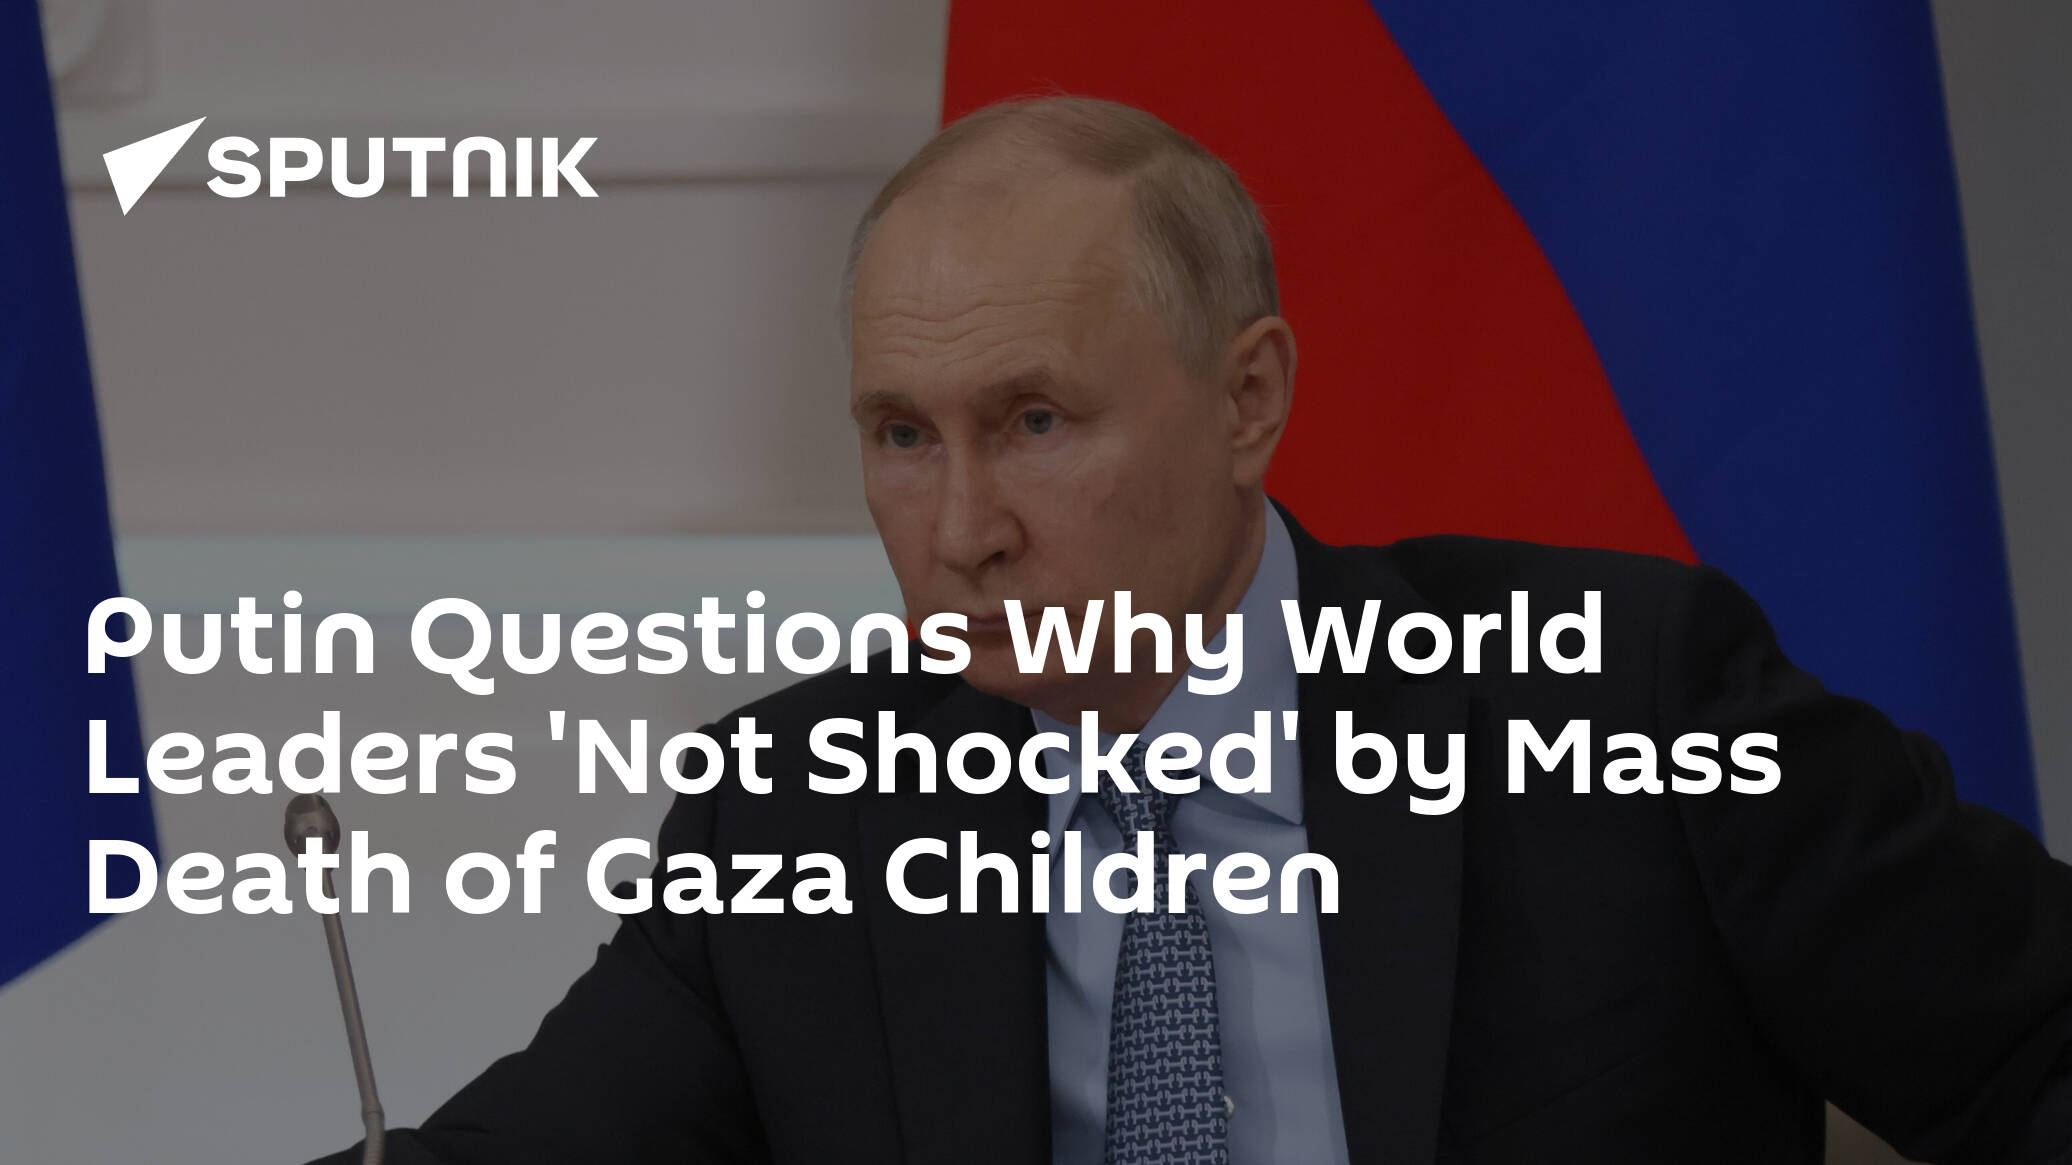 Putin Questions Why World Leaders 'Not Shocked' by Mass Death of Gaza Children